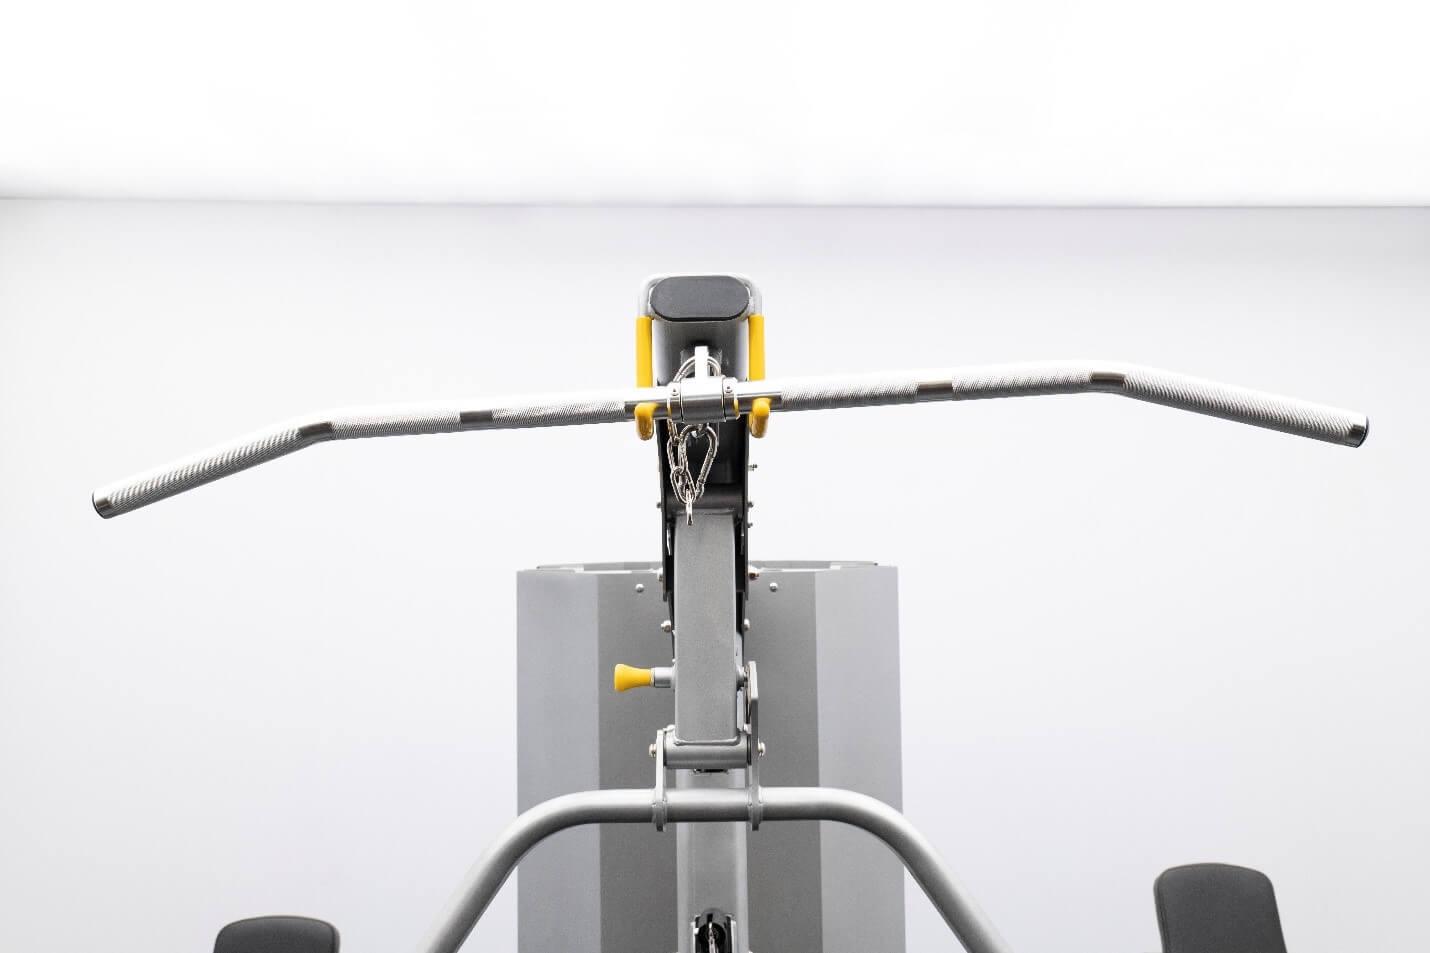 Lat Pulldown Bar can be stored when not using